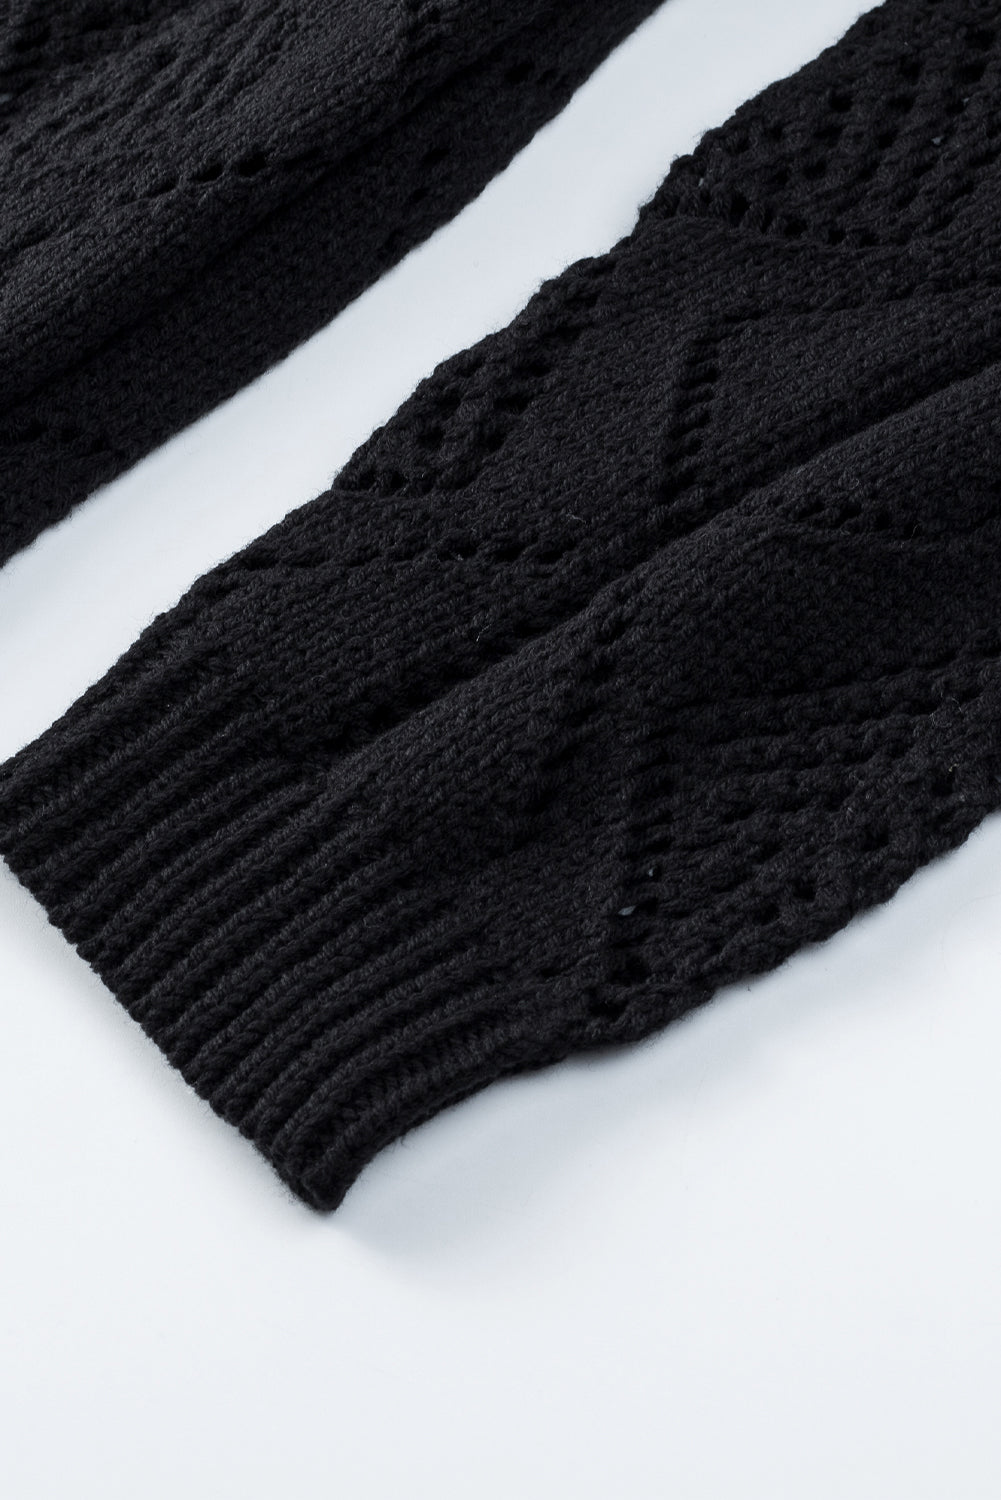 Black Hollow-out Openwork Knit Cardigan